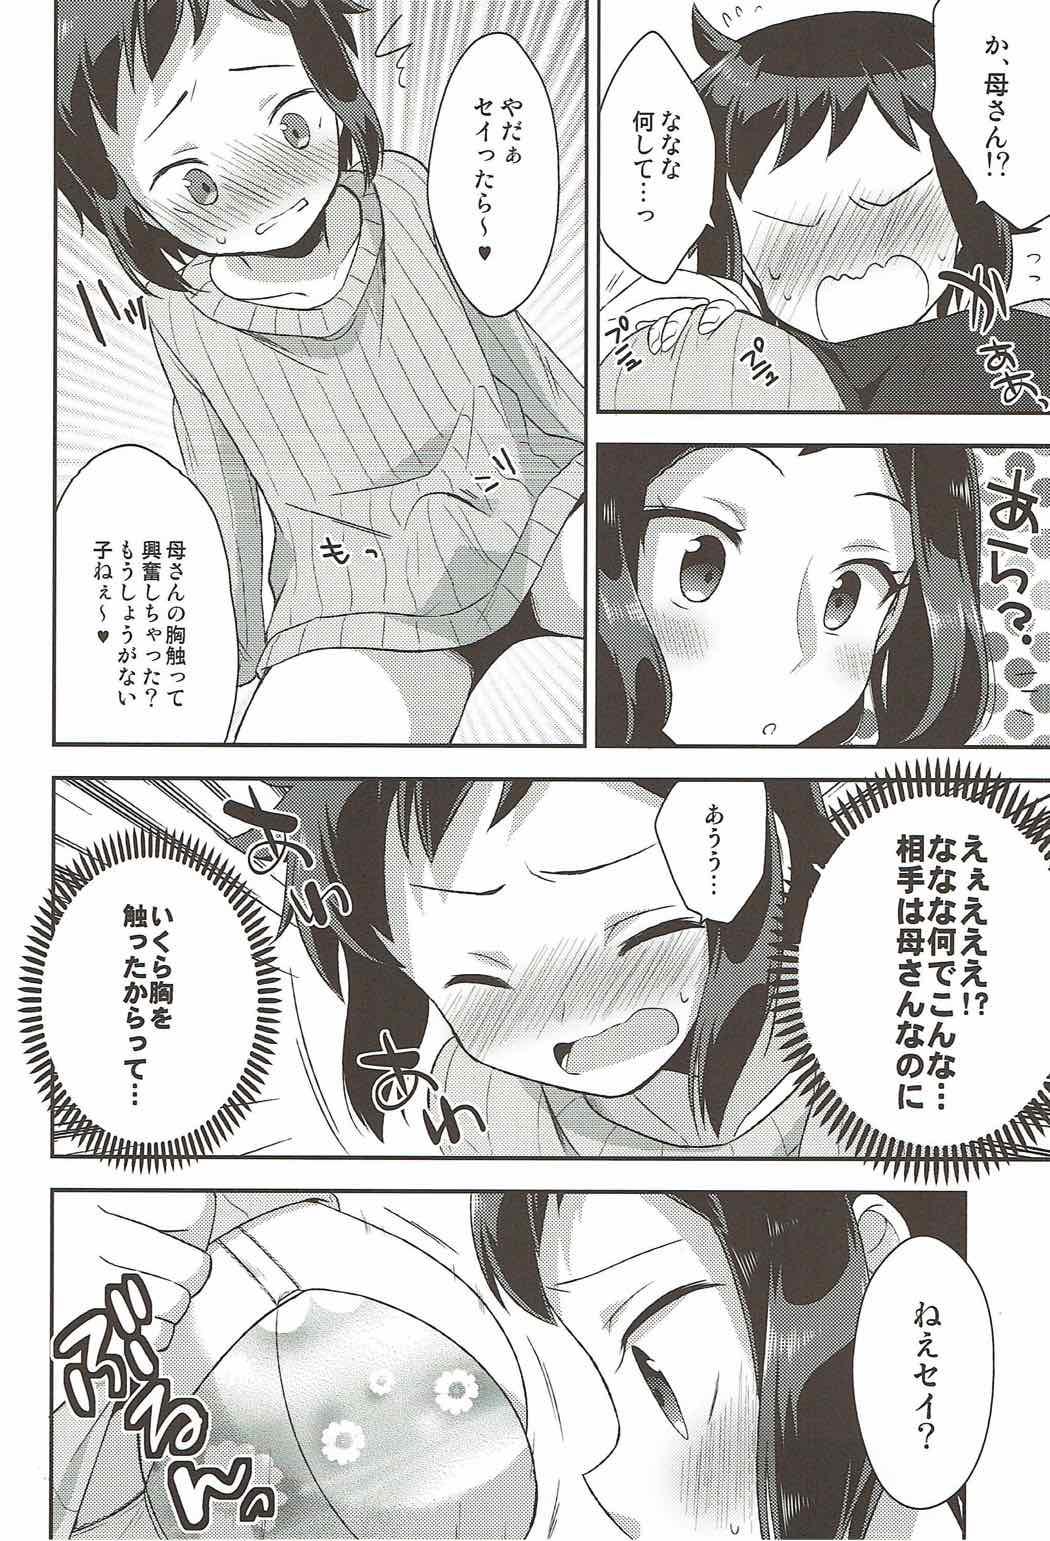 Shaved Pussy Mama Shiyo! - Gundam build fighters Eating - Page 11